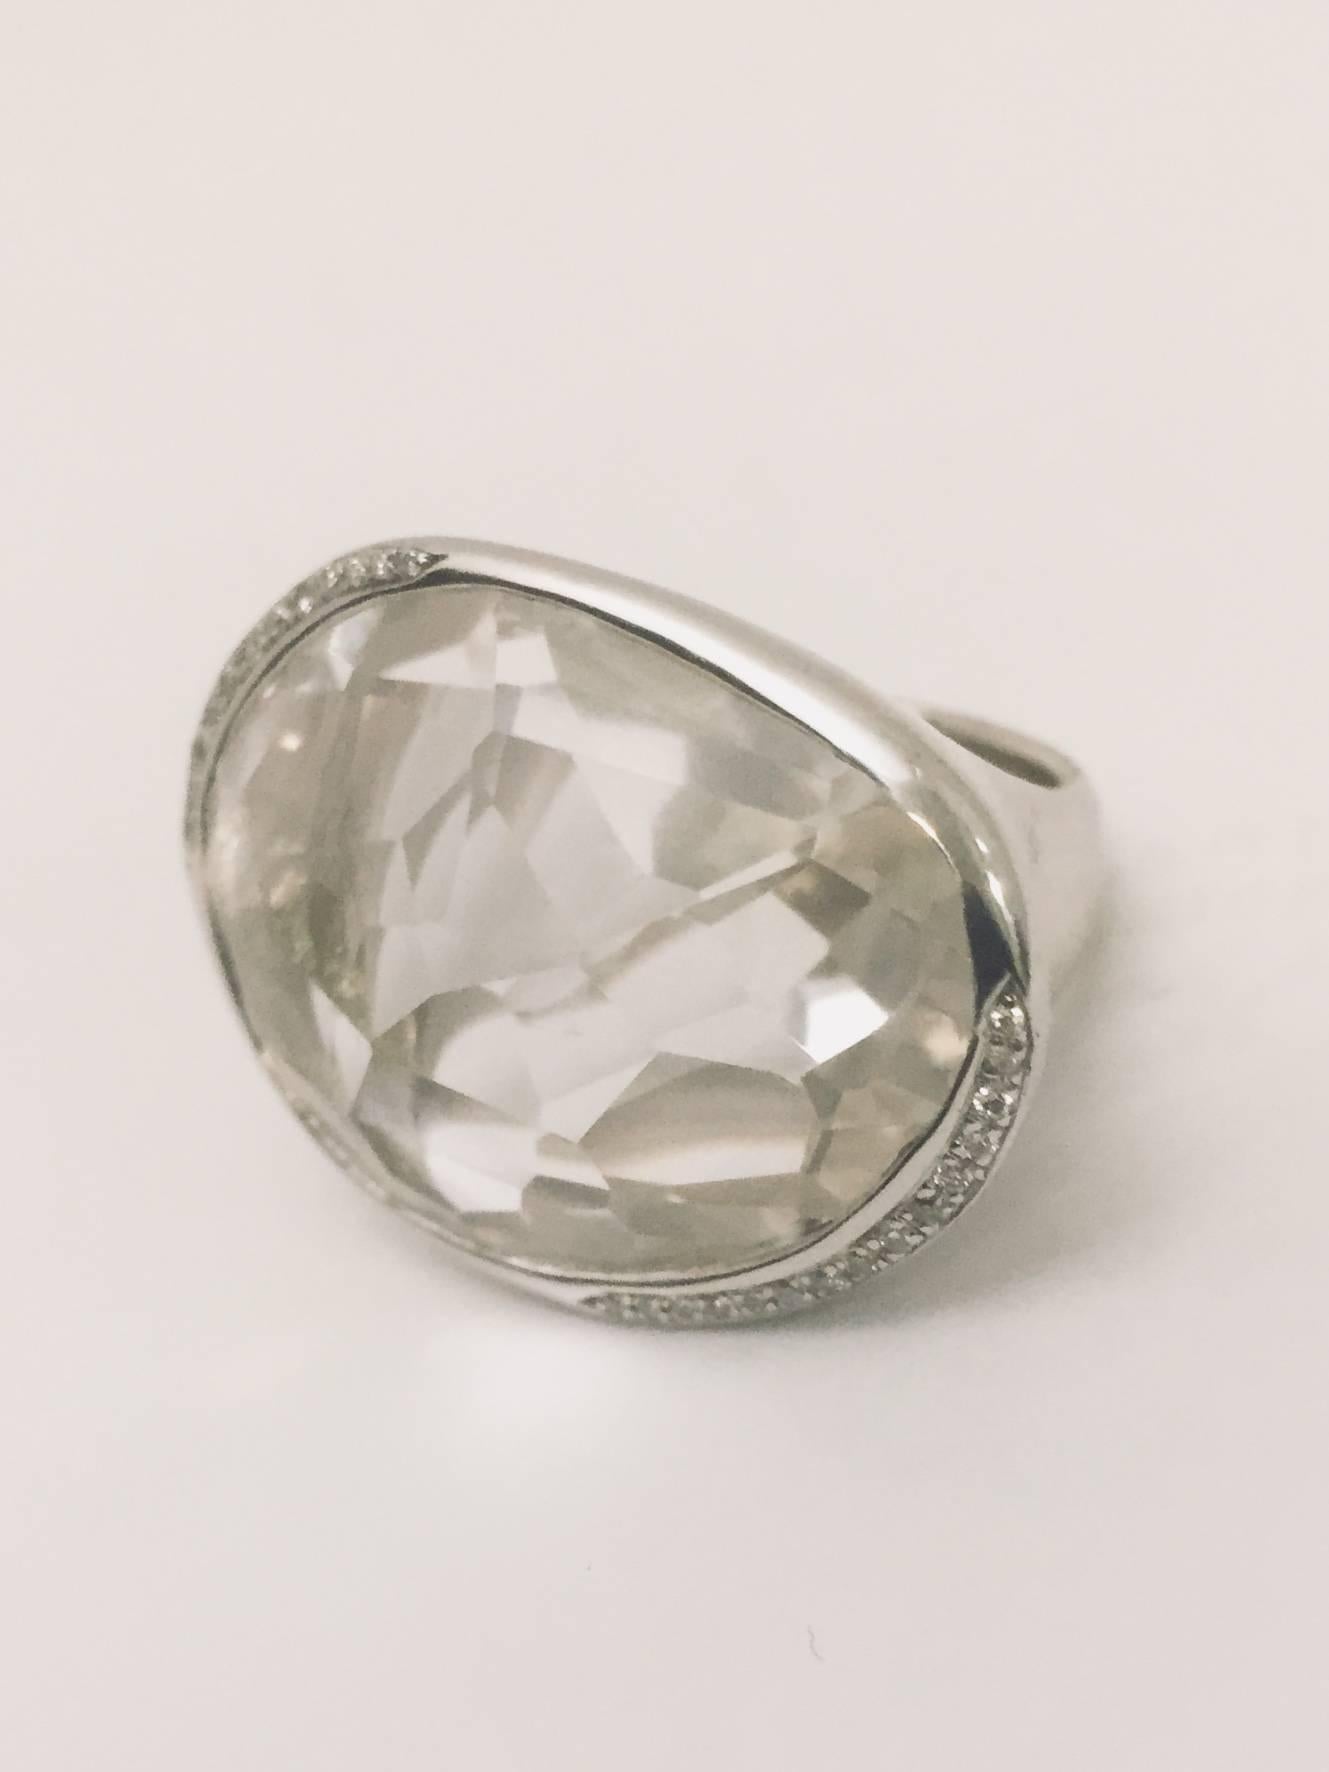 The new passion in fine jewelry is hallmarked "Ippolita".  Contemporary, fun and unique designs are eye catching!  This sterling silver ring features a 